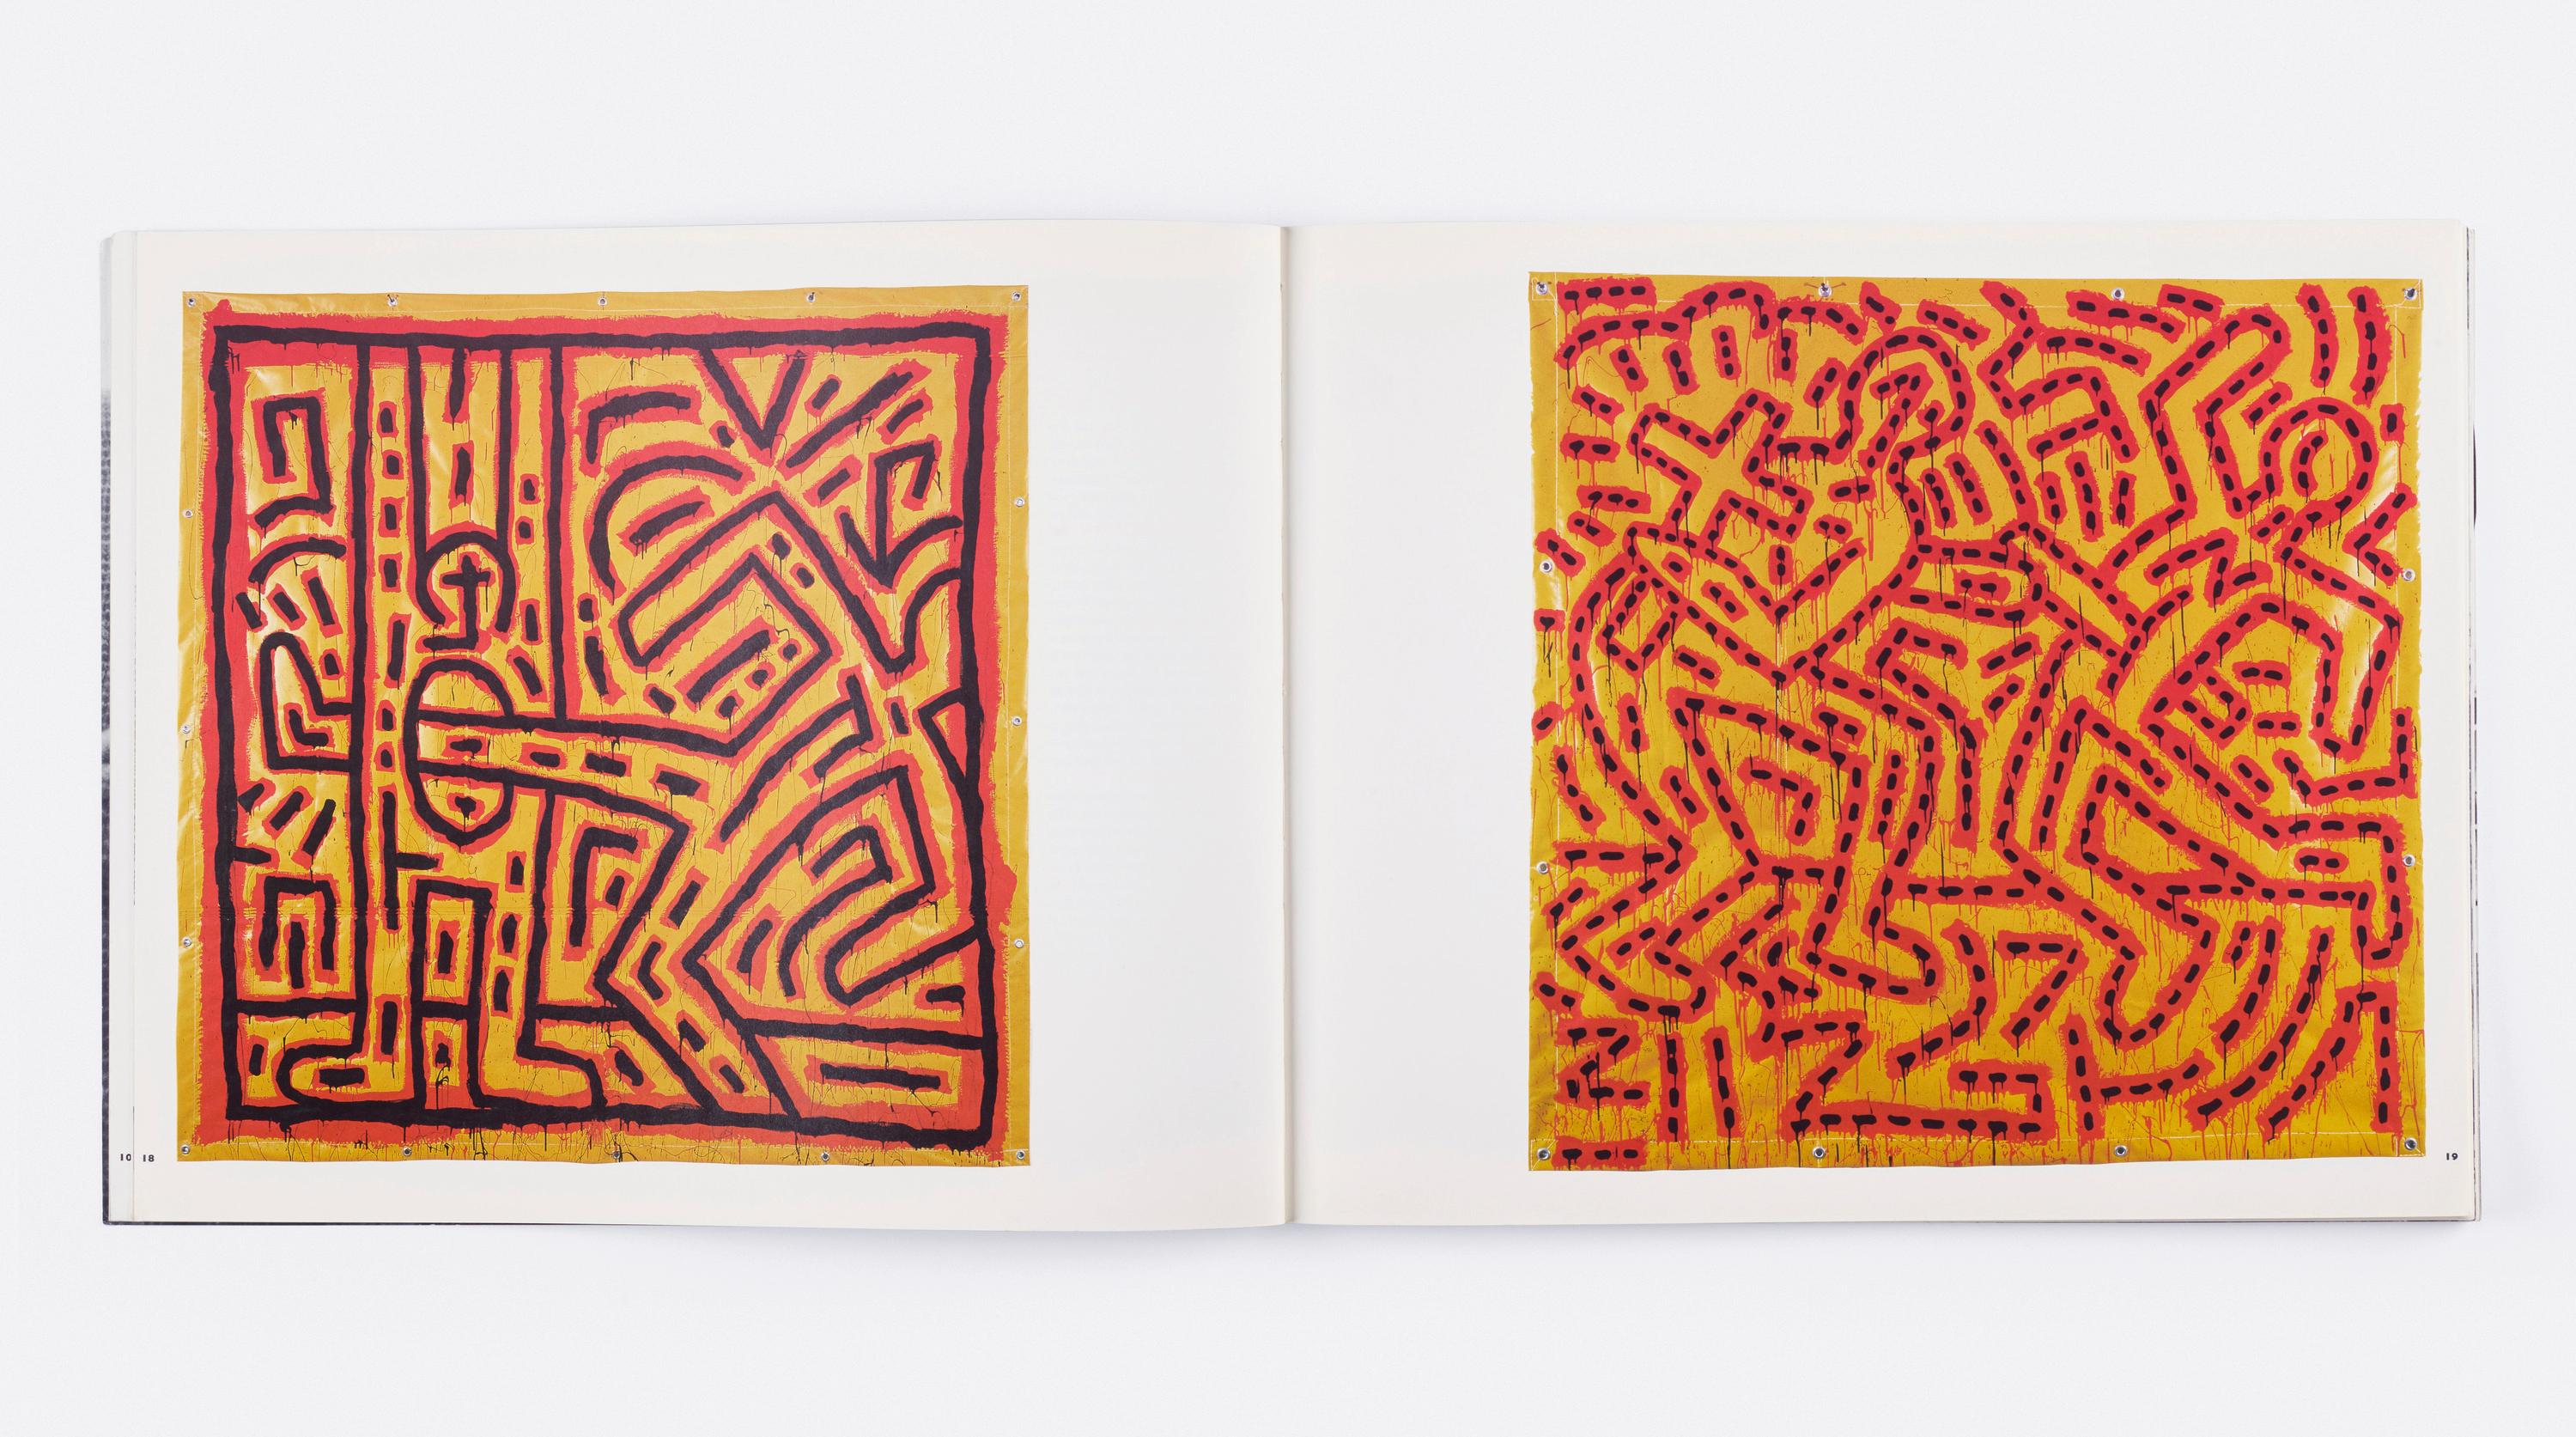 Keith Haring Stedelijk Museum drawing & catalogue (signed Keith Haring drawing)  For Sale 10